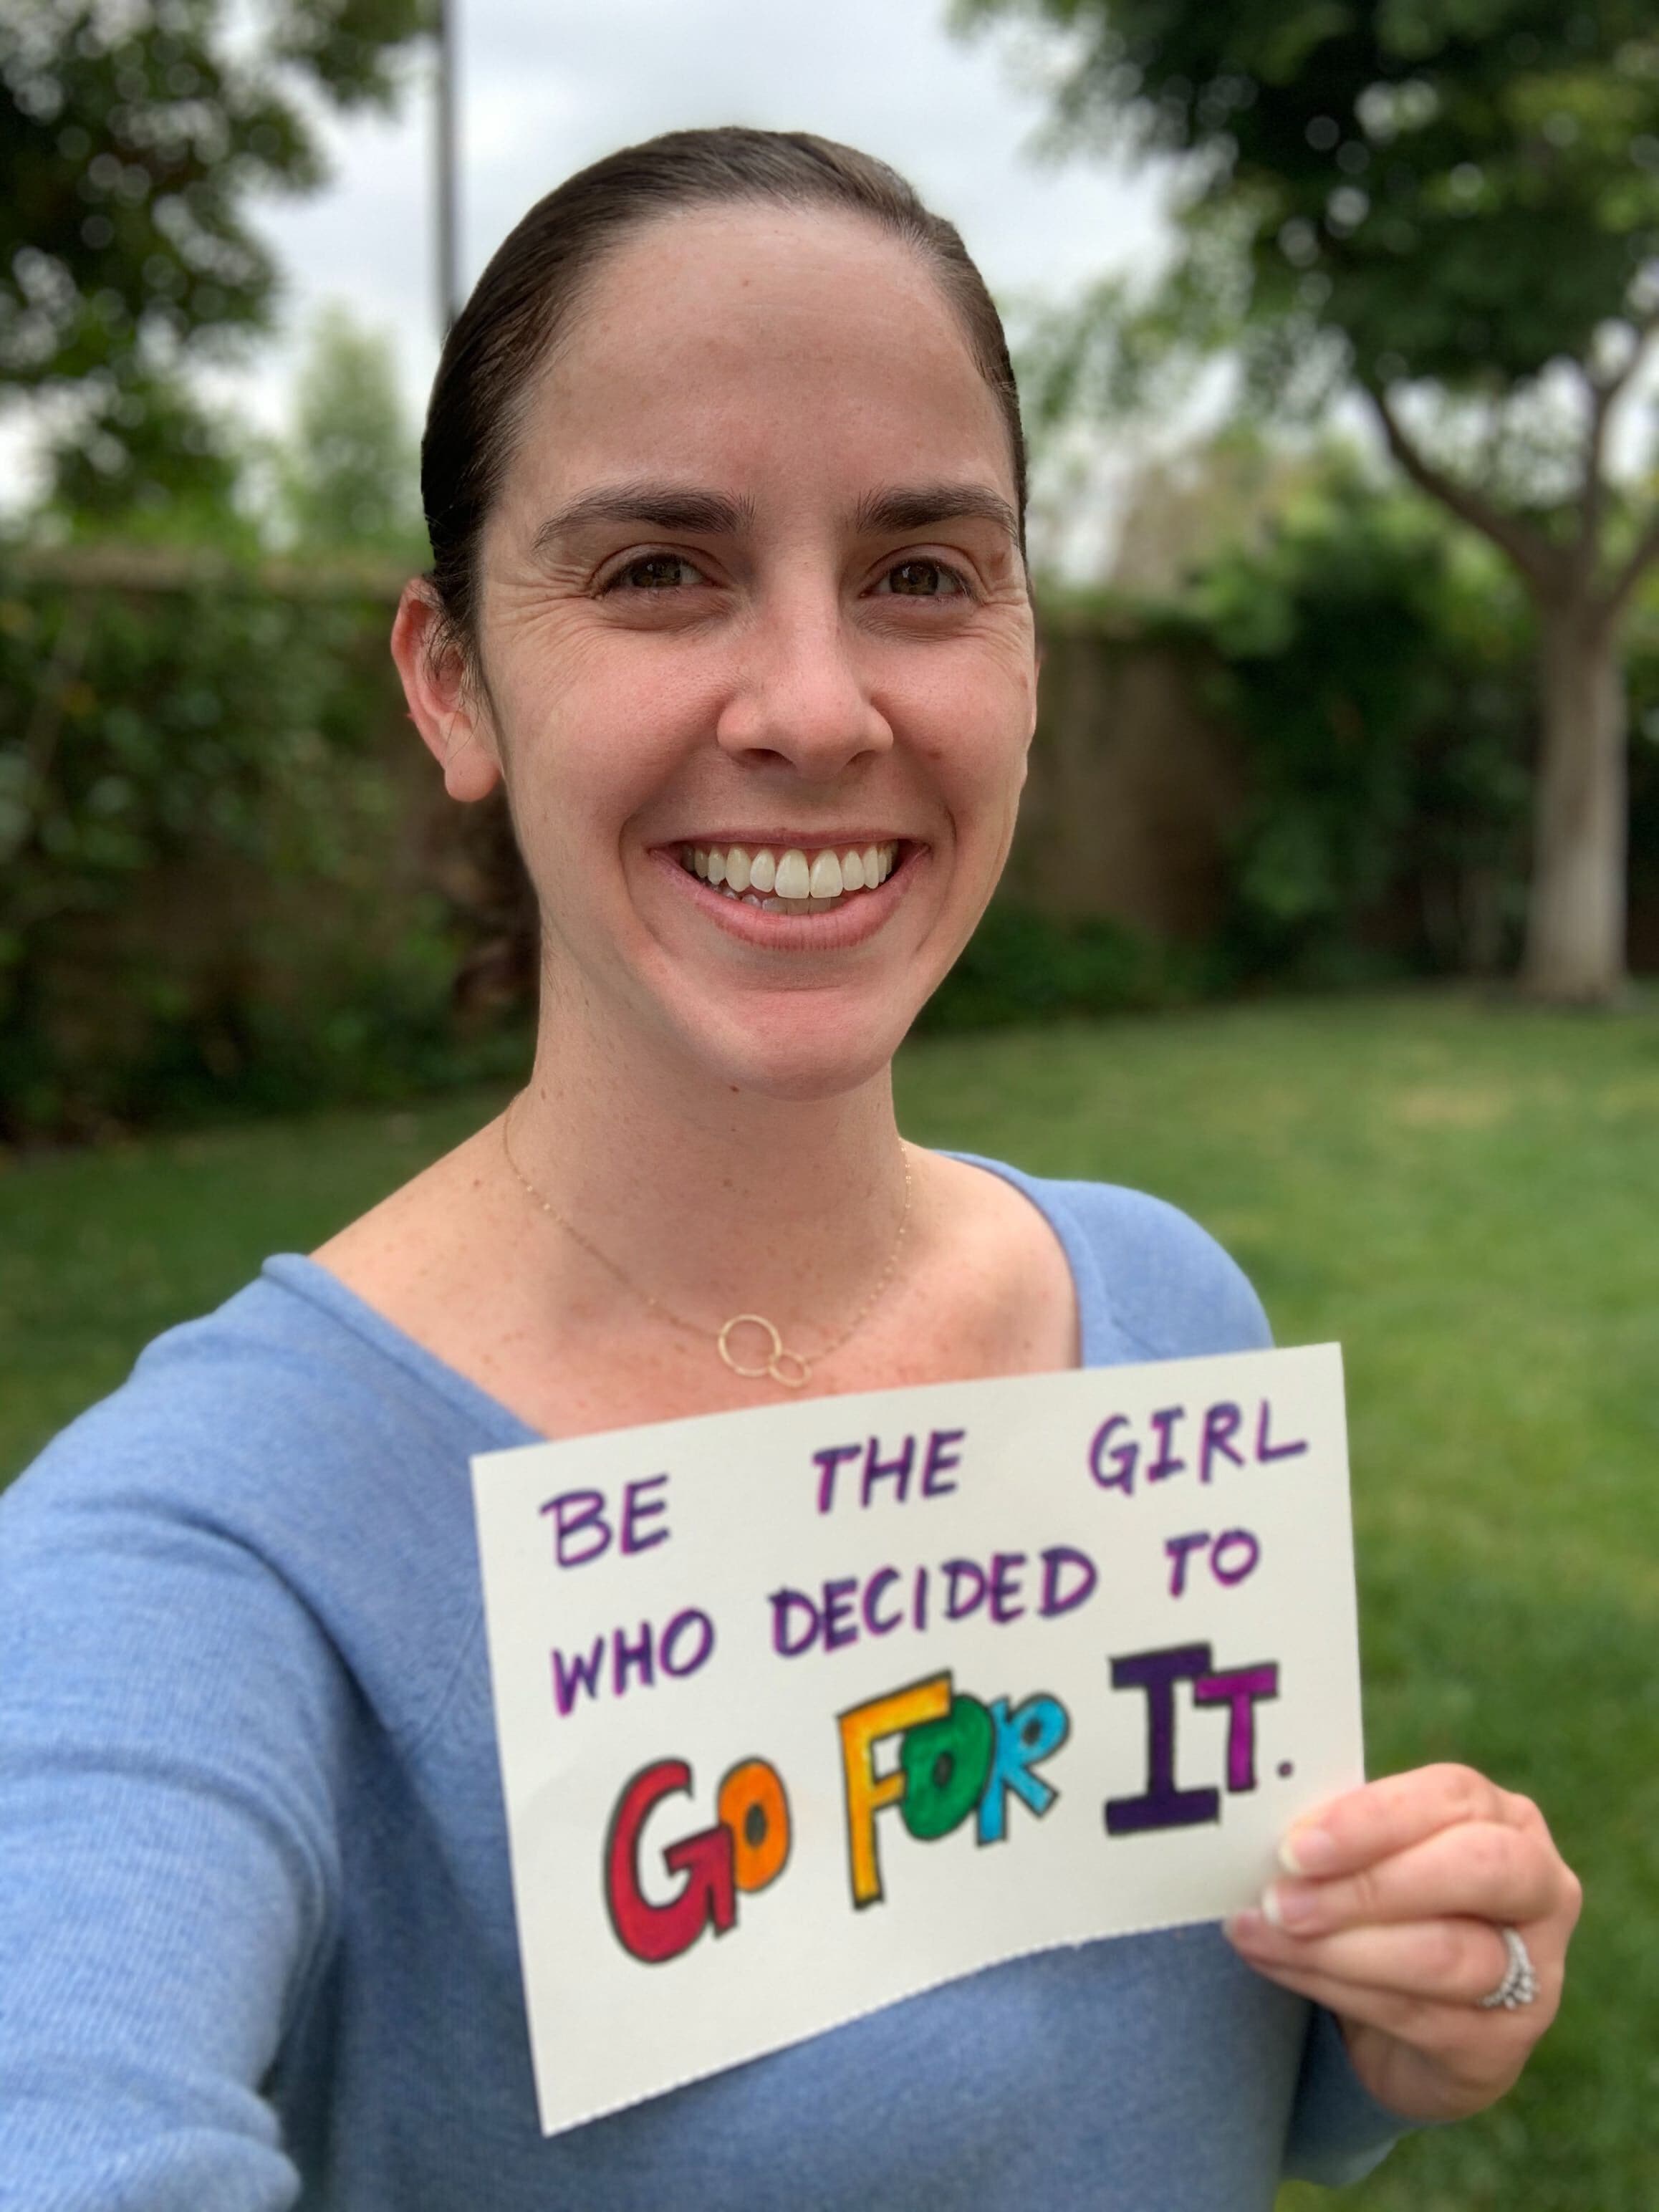 Rachelle is smiling, holding a handmade sign which says "Be the girl who decided to go for it!"